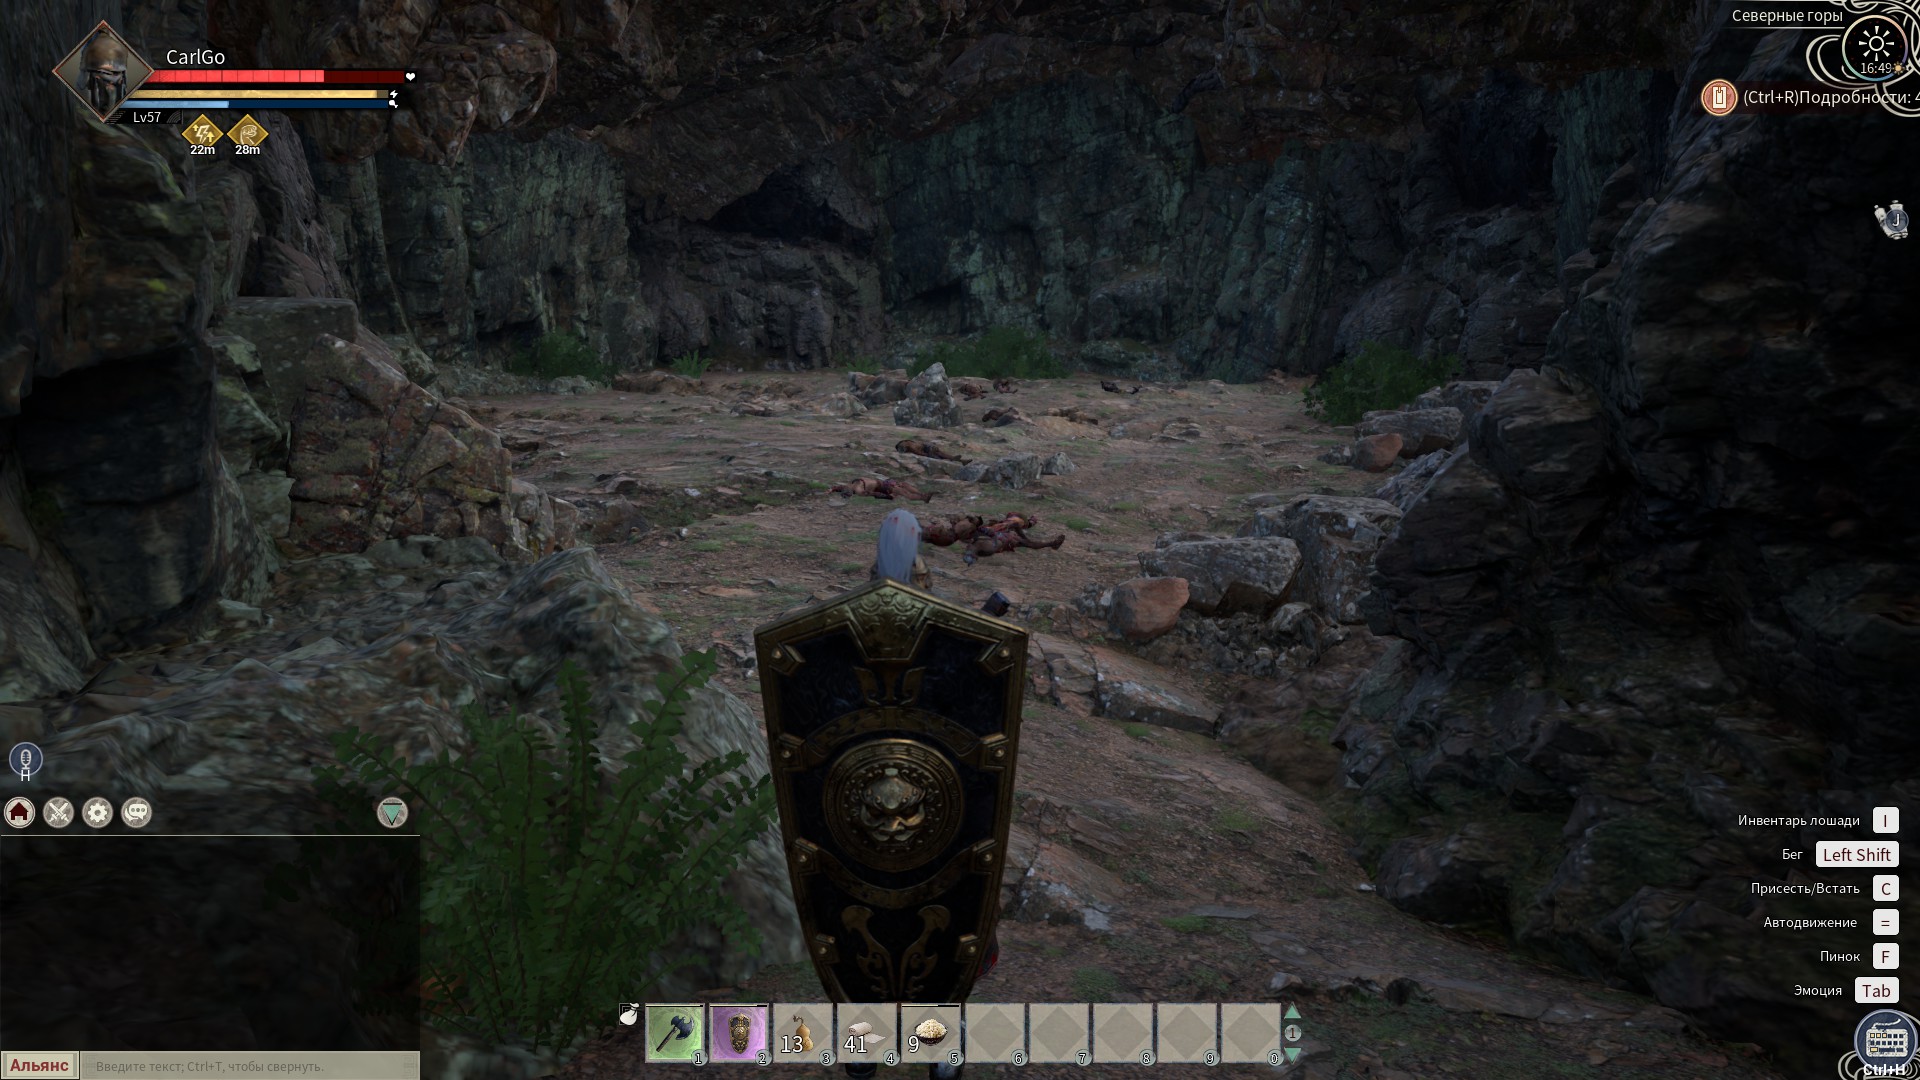 : /Locations: Cave image 54